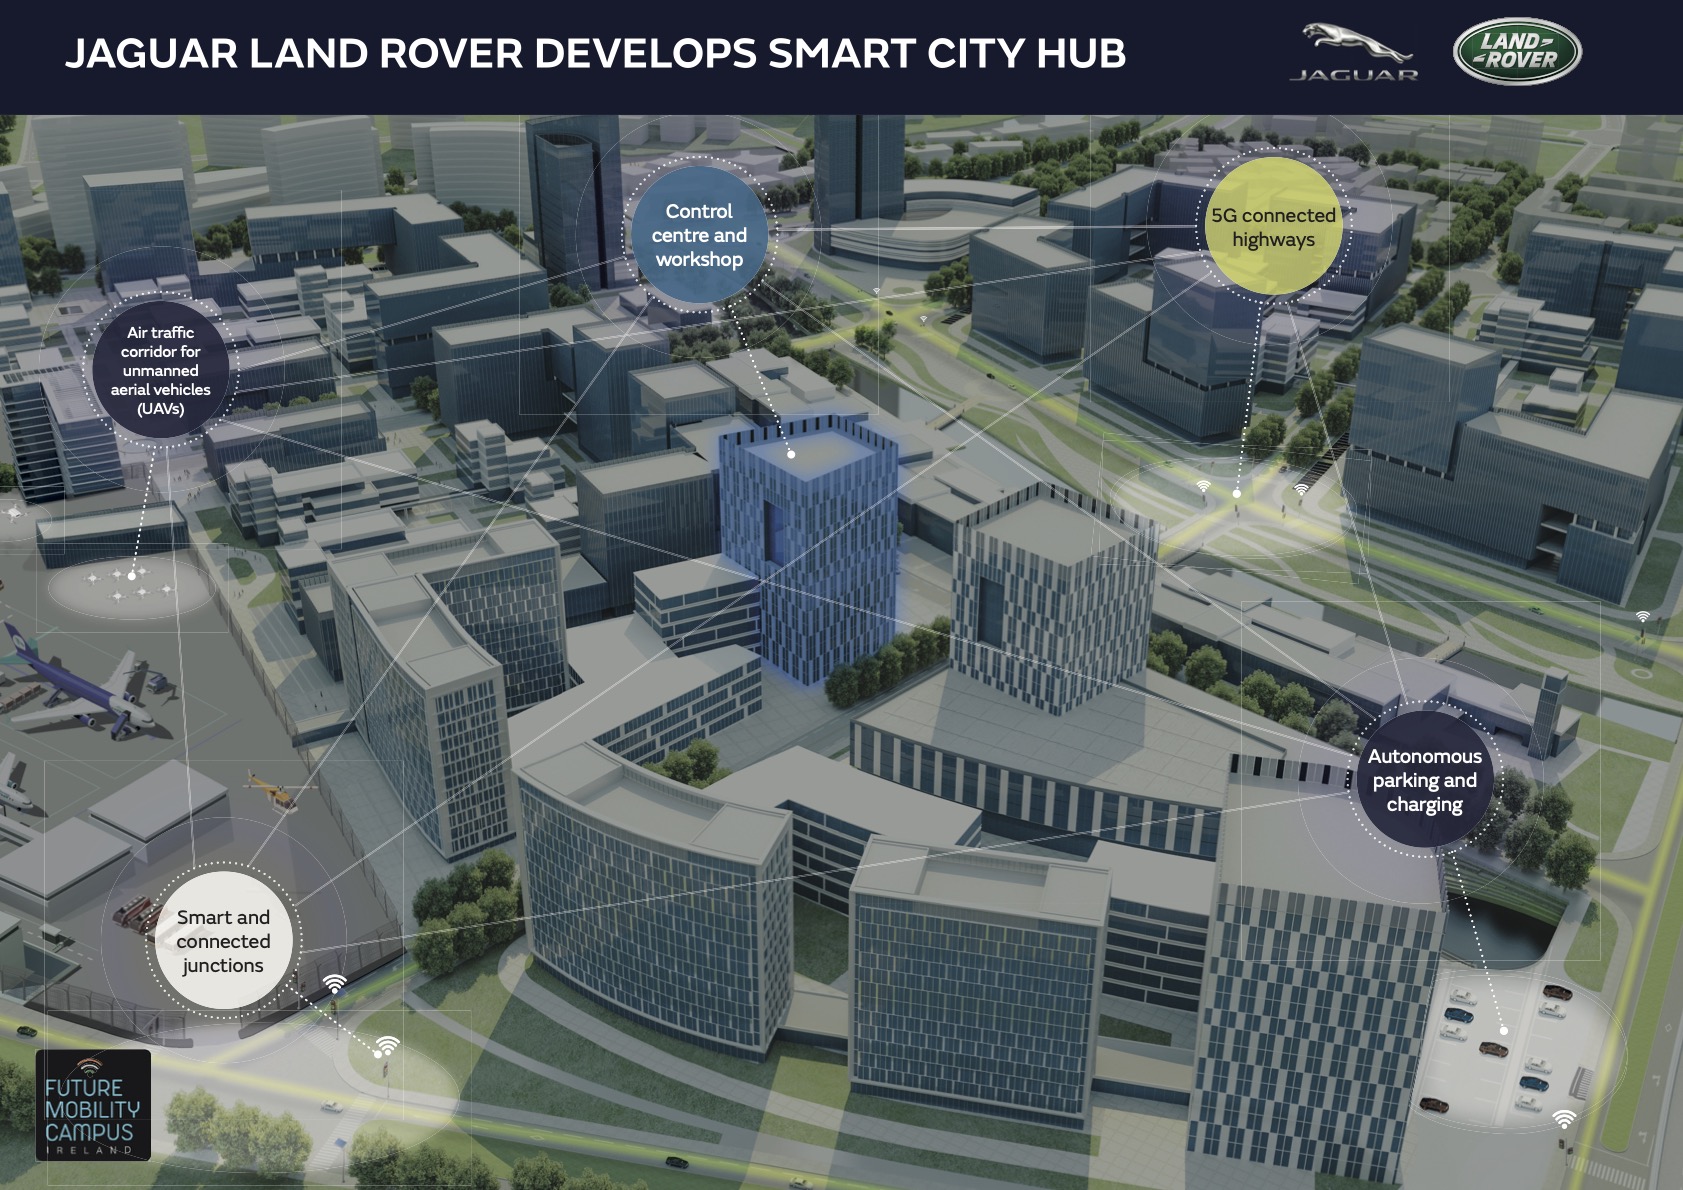 New smart city hub to put connected vehicles through their paces